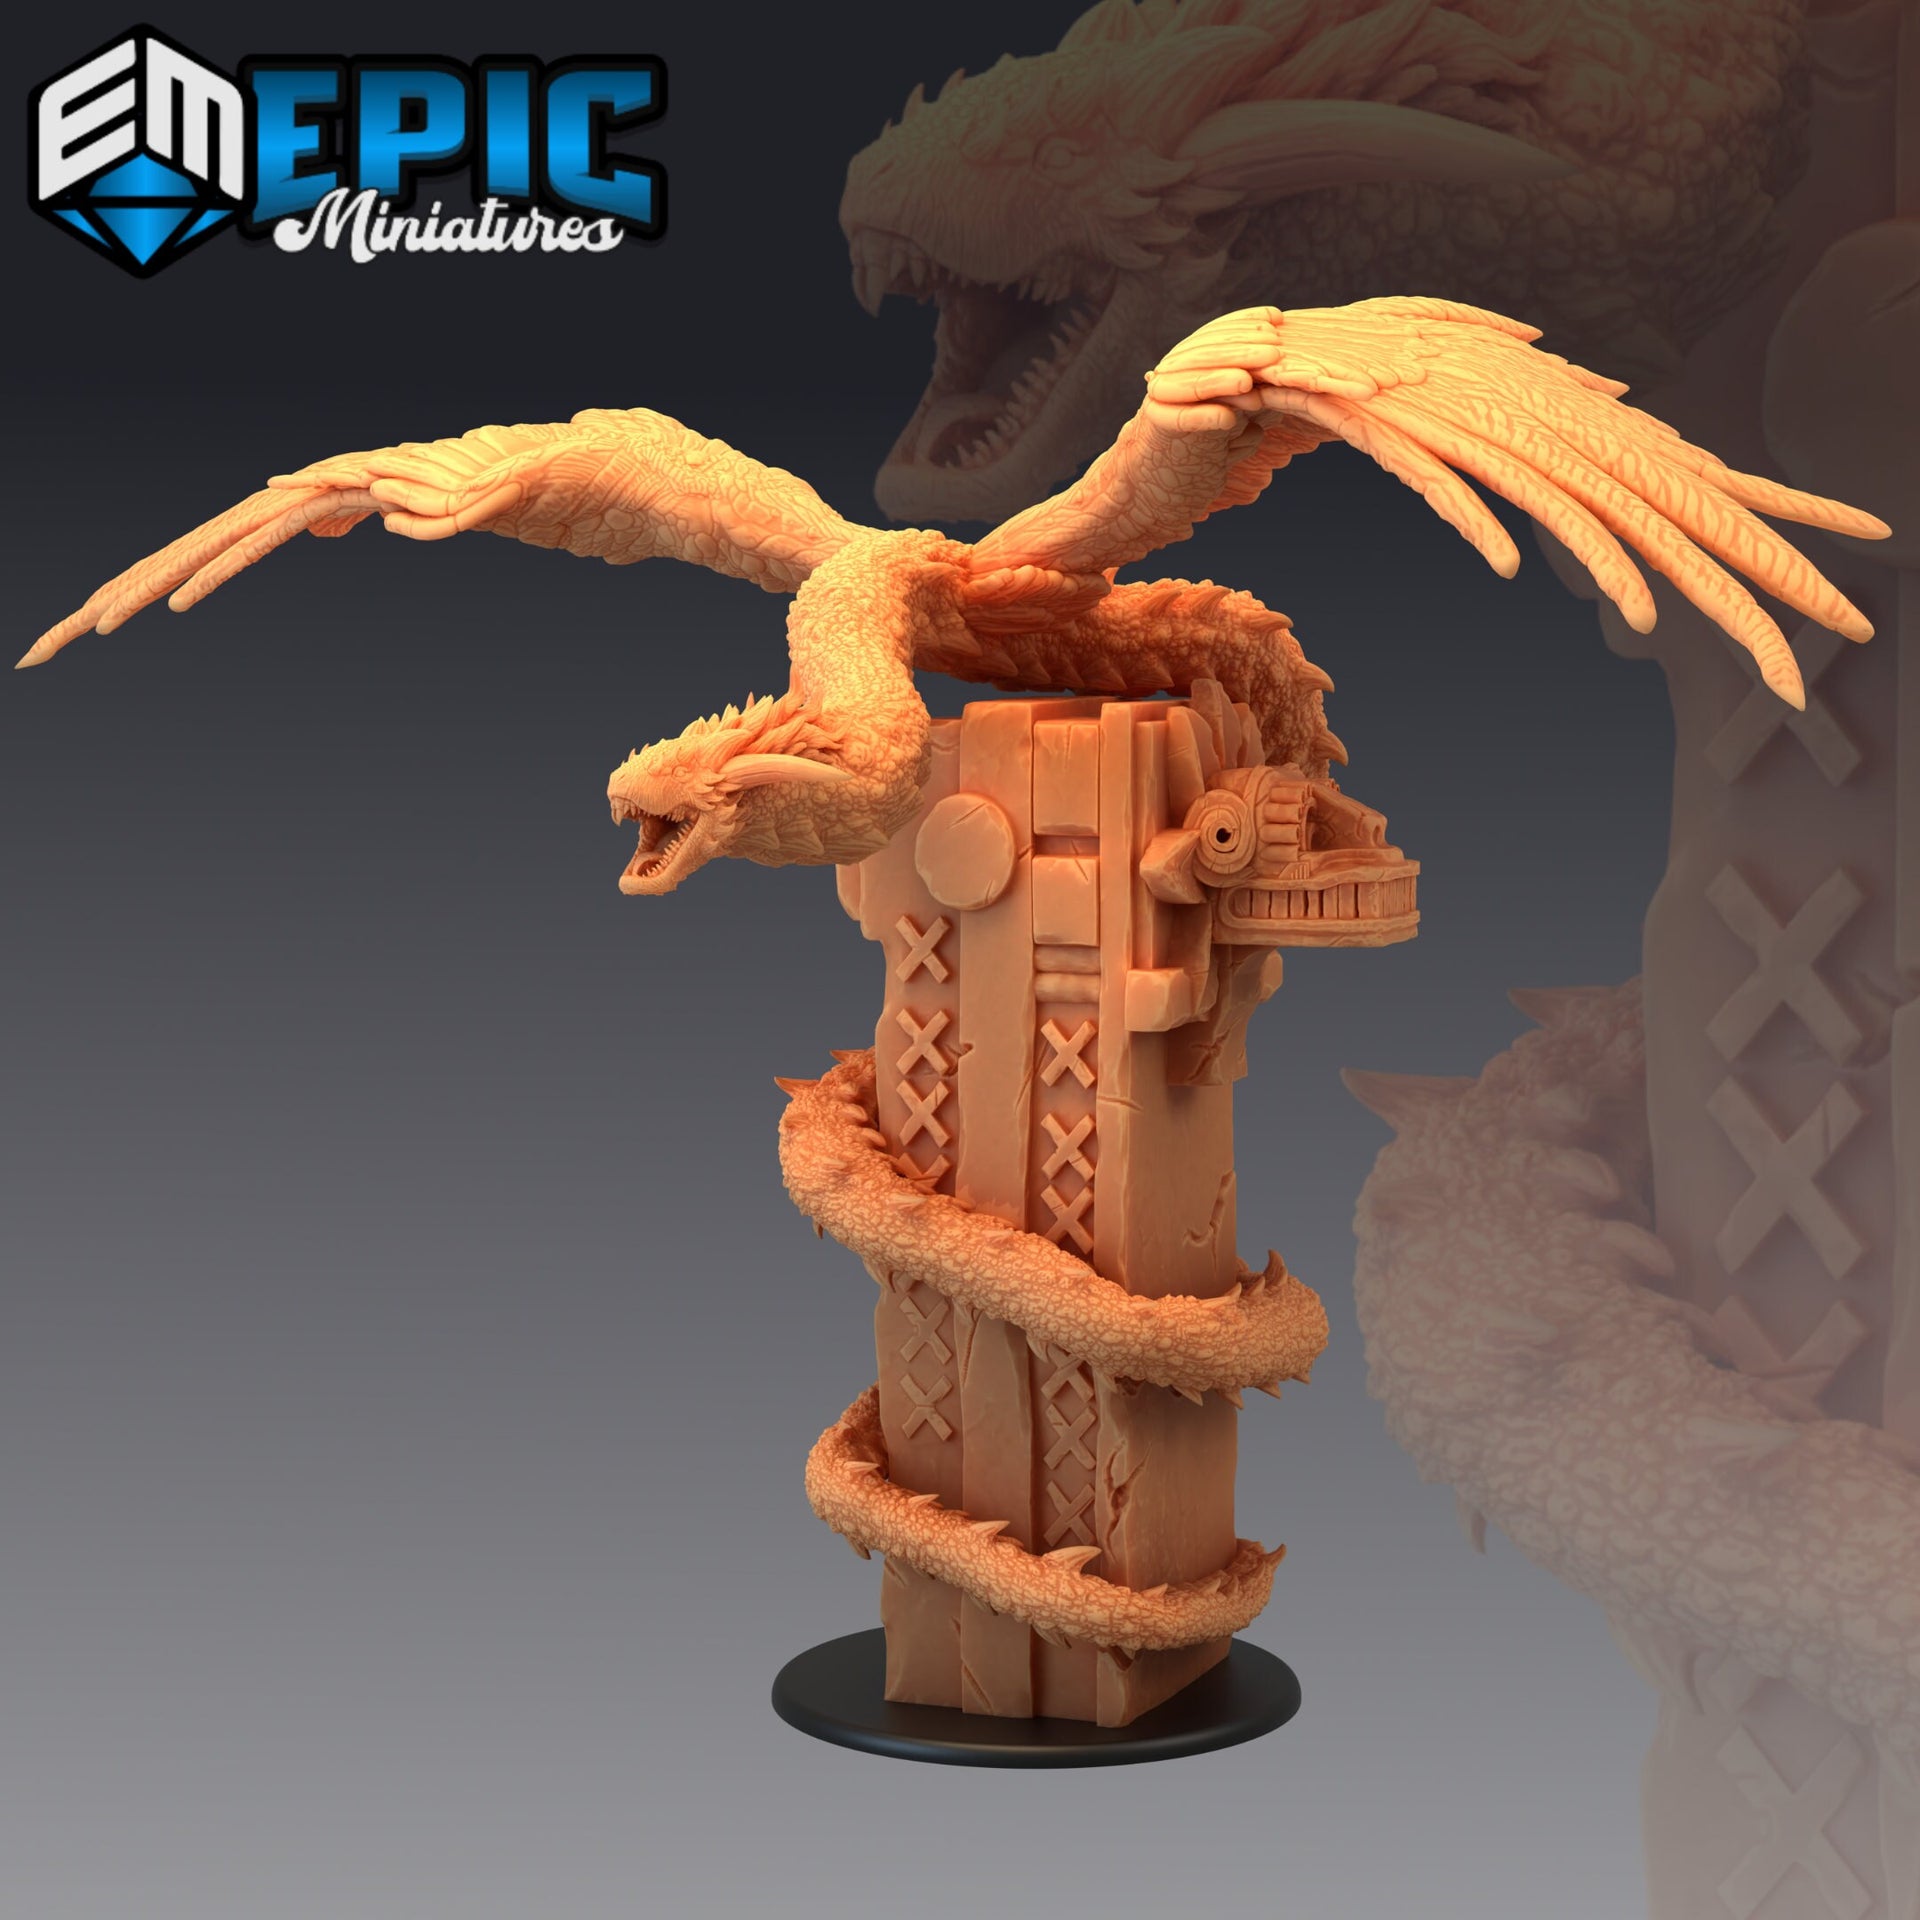 Feathered Serpent - Epic Miniatures 